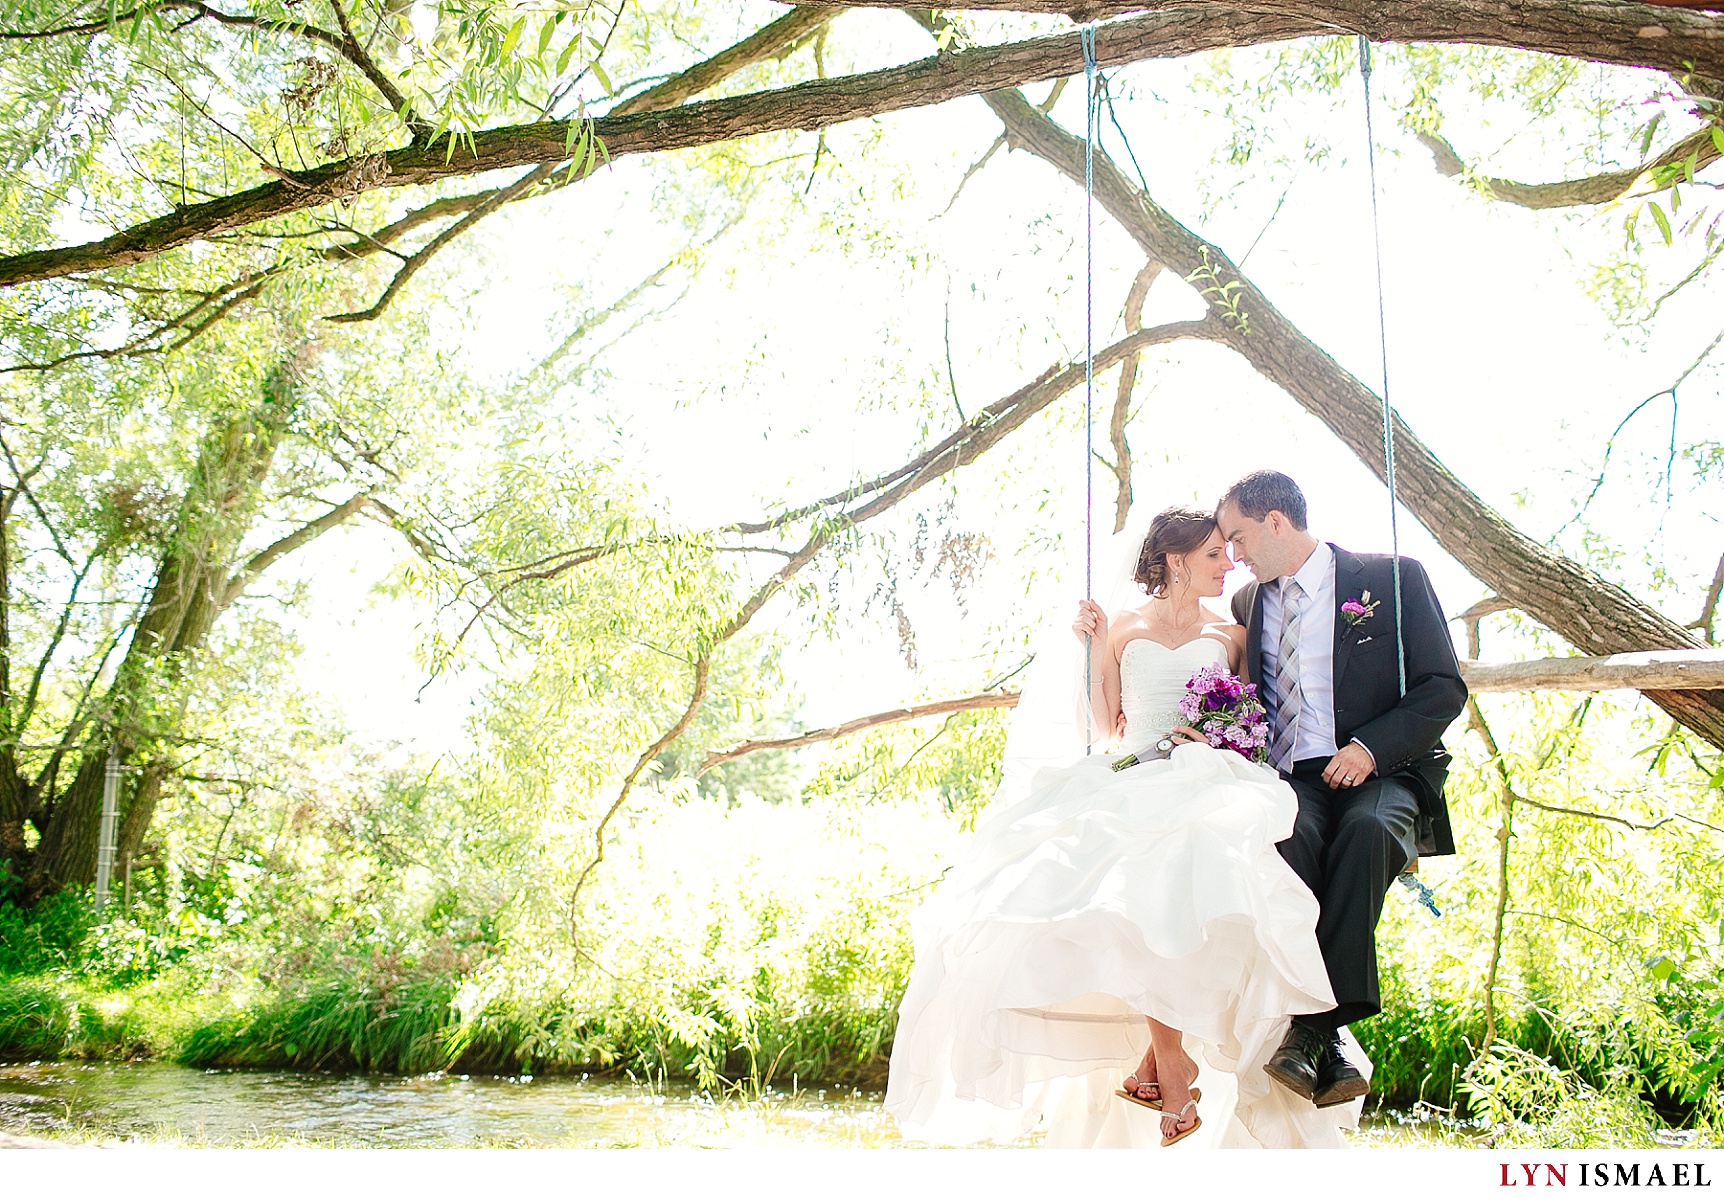 A romantic photo of the bride and groom on a swing.